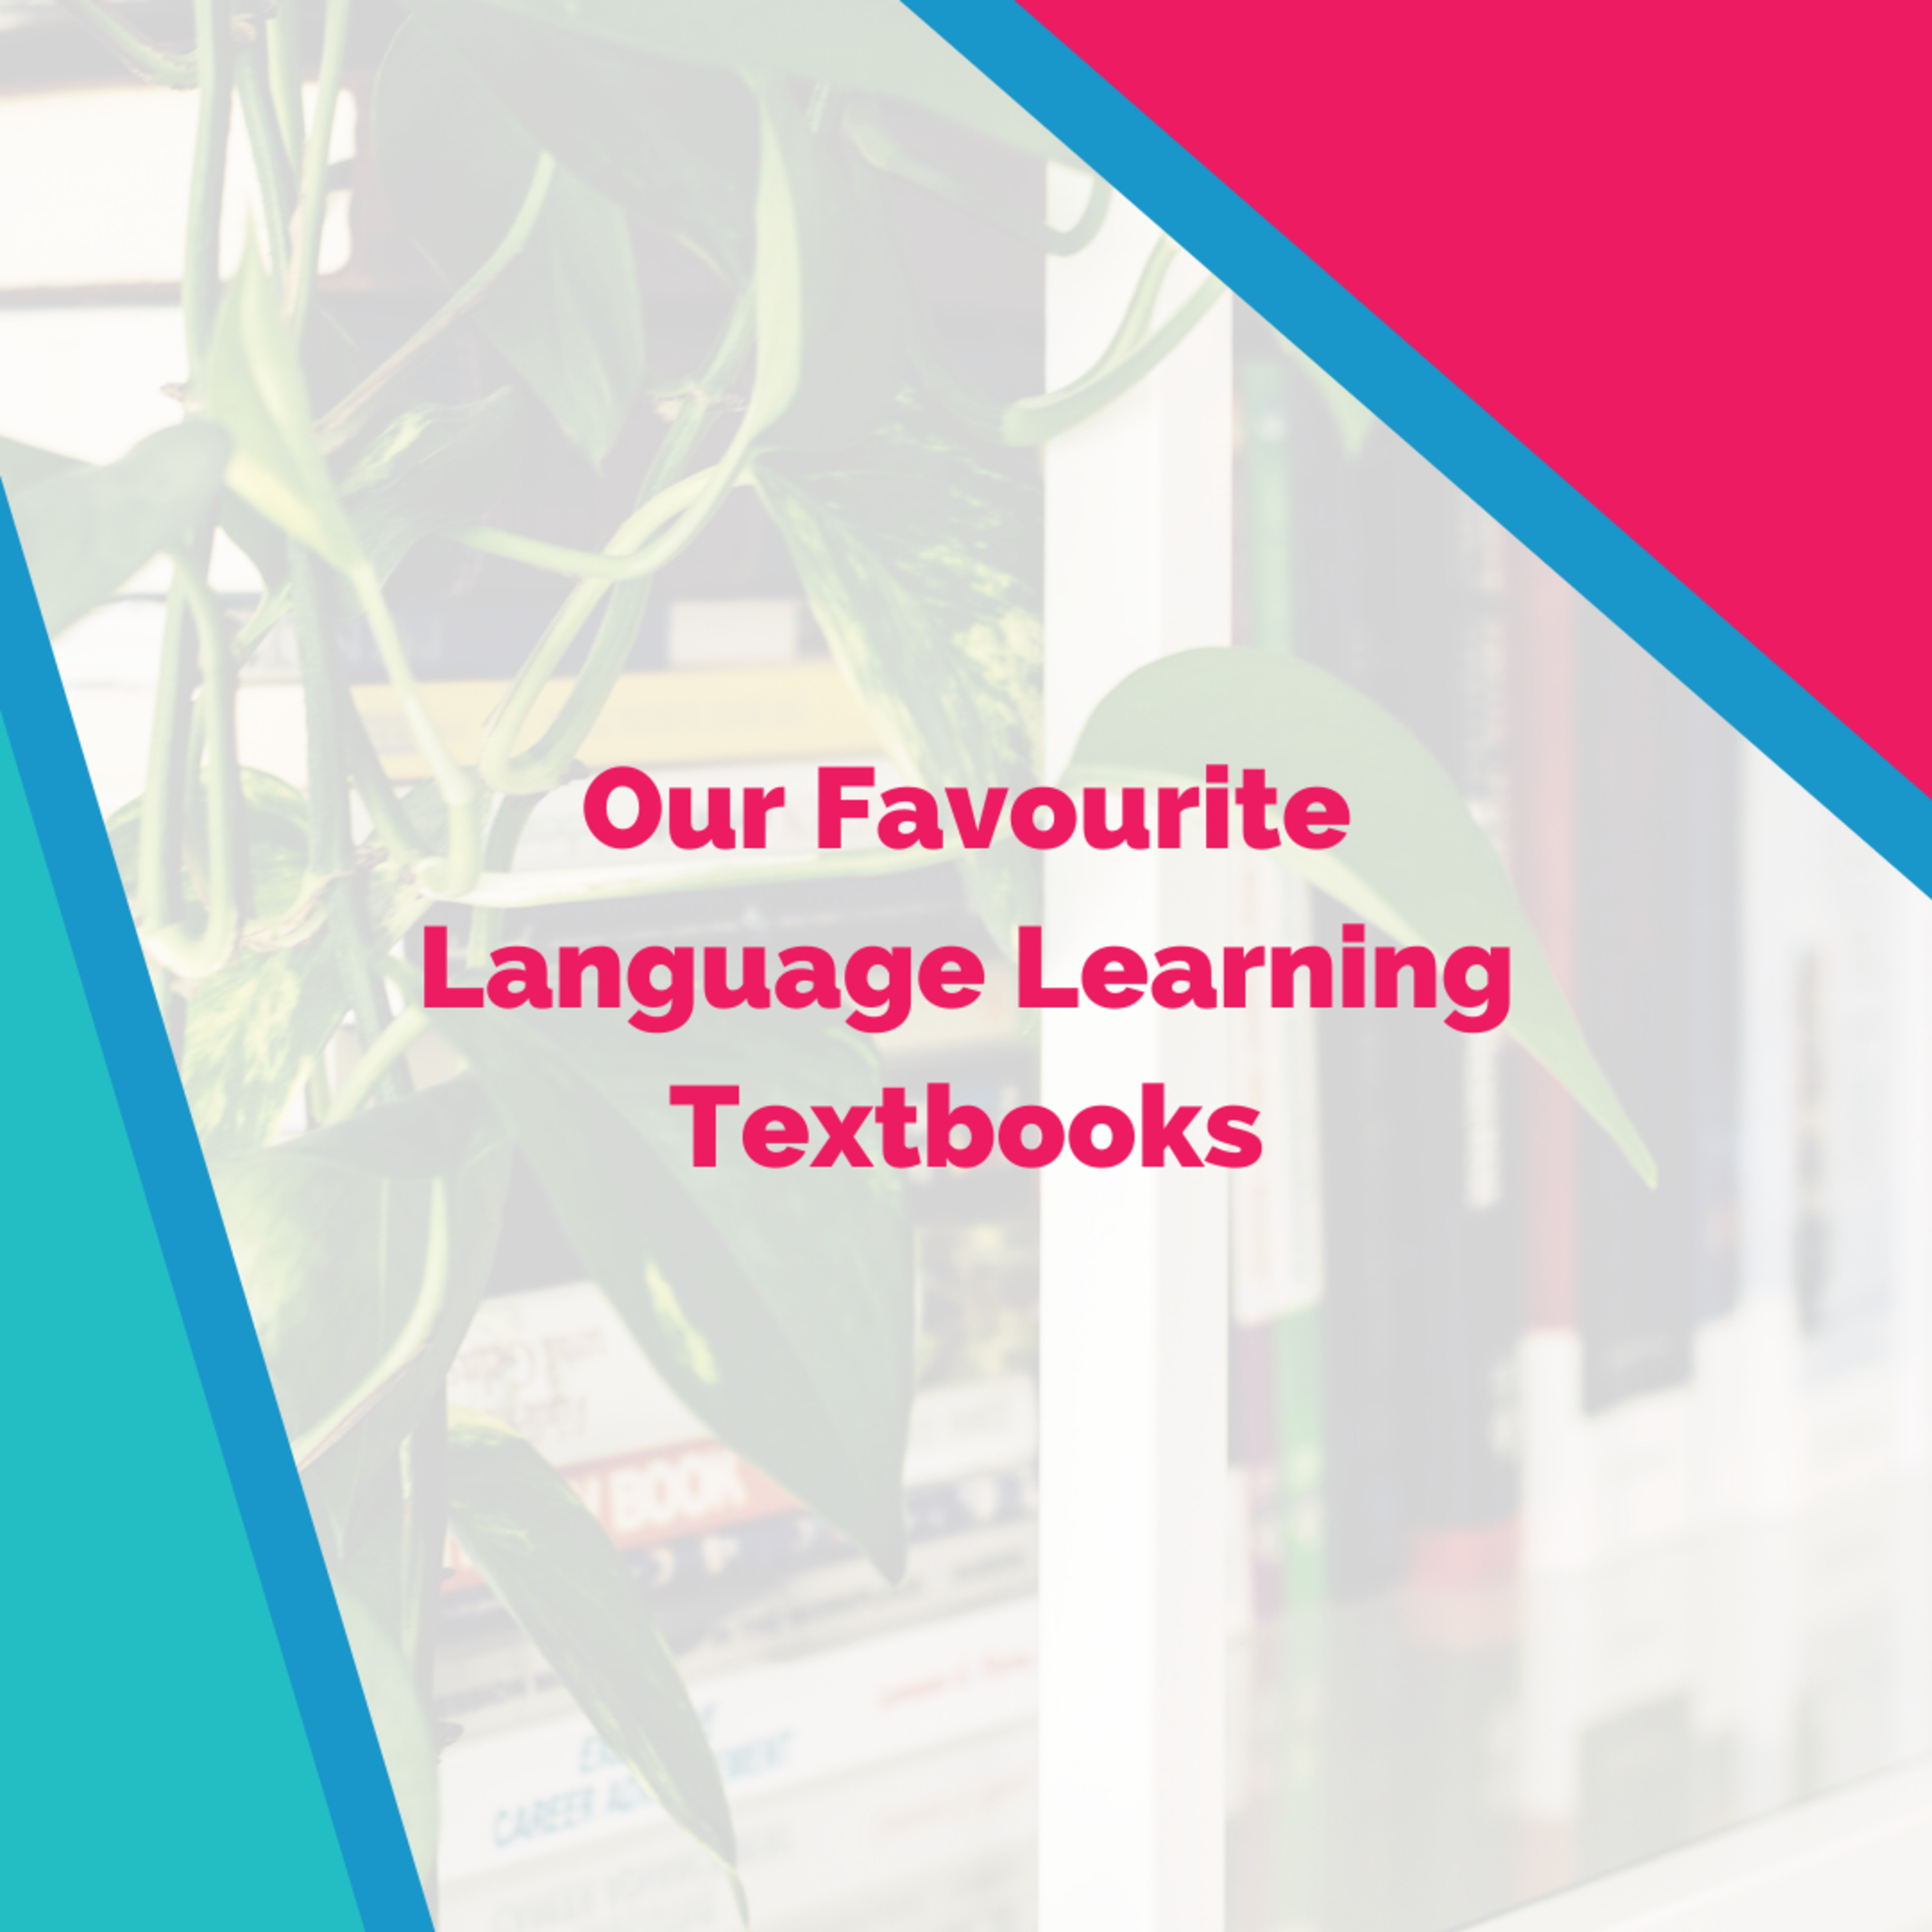 Our Favourite Language Learning Textbooks